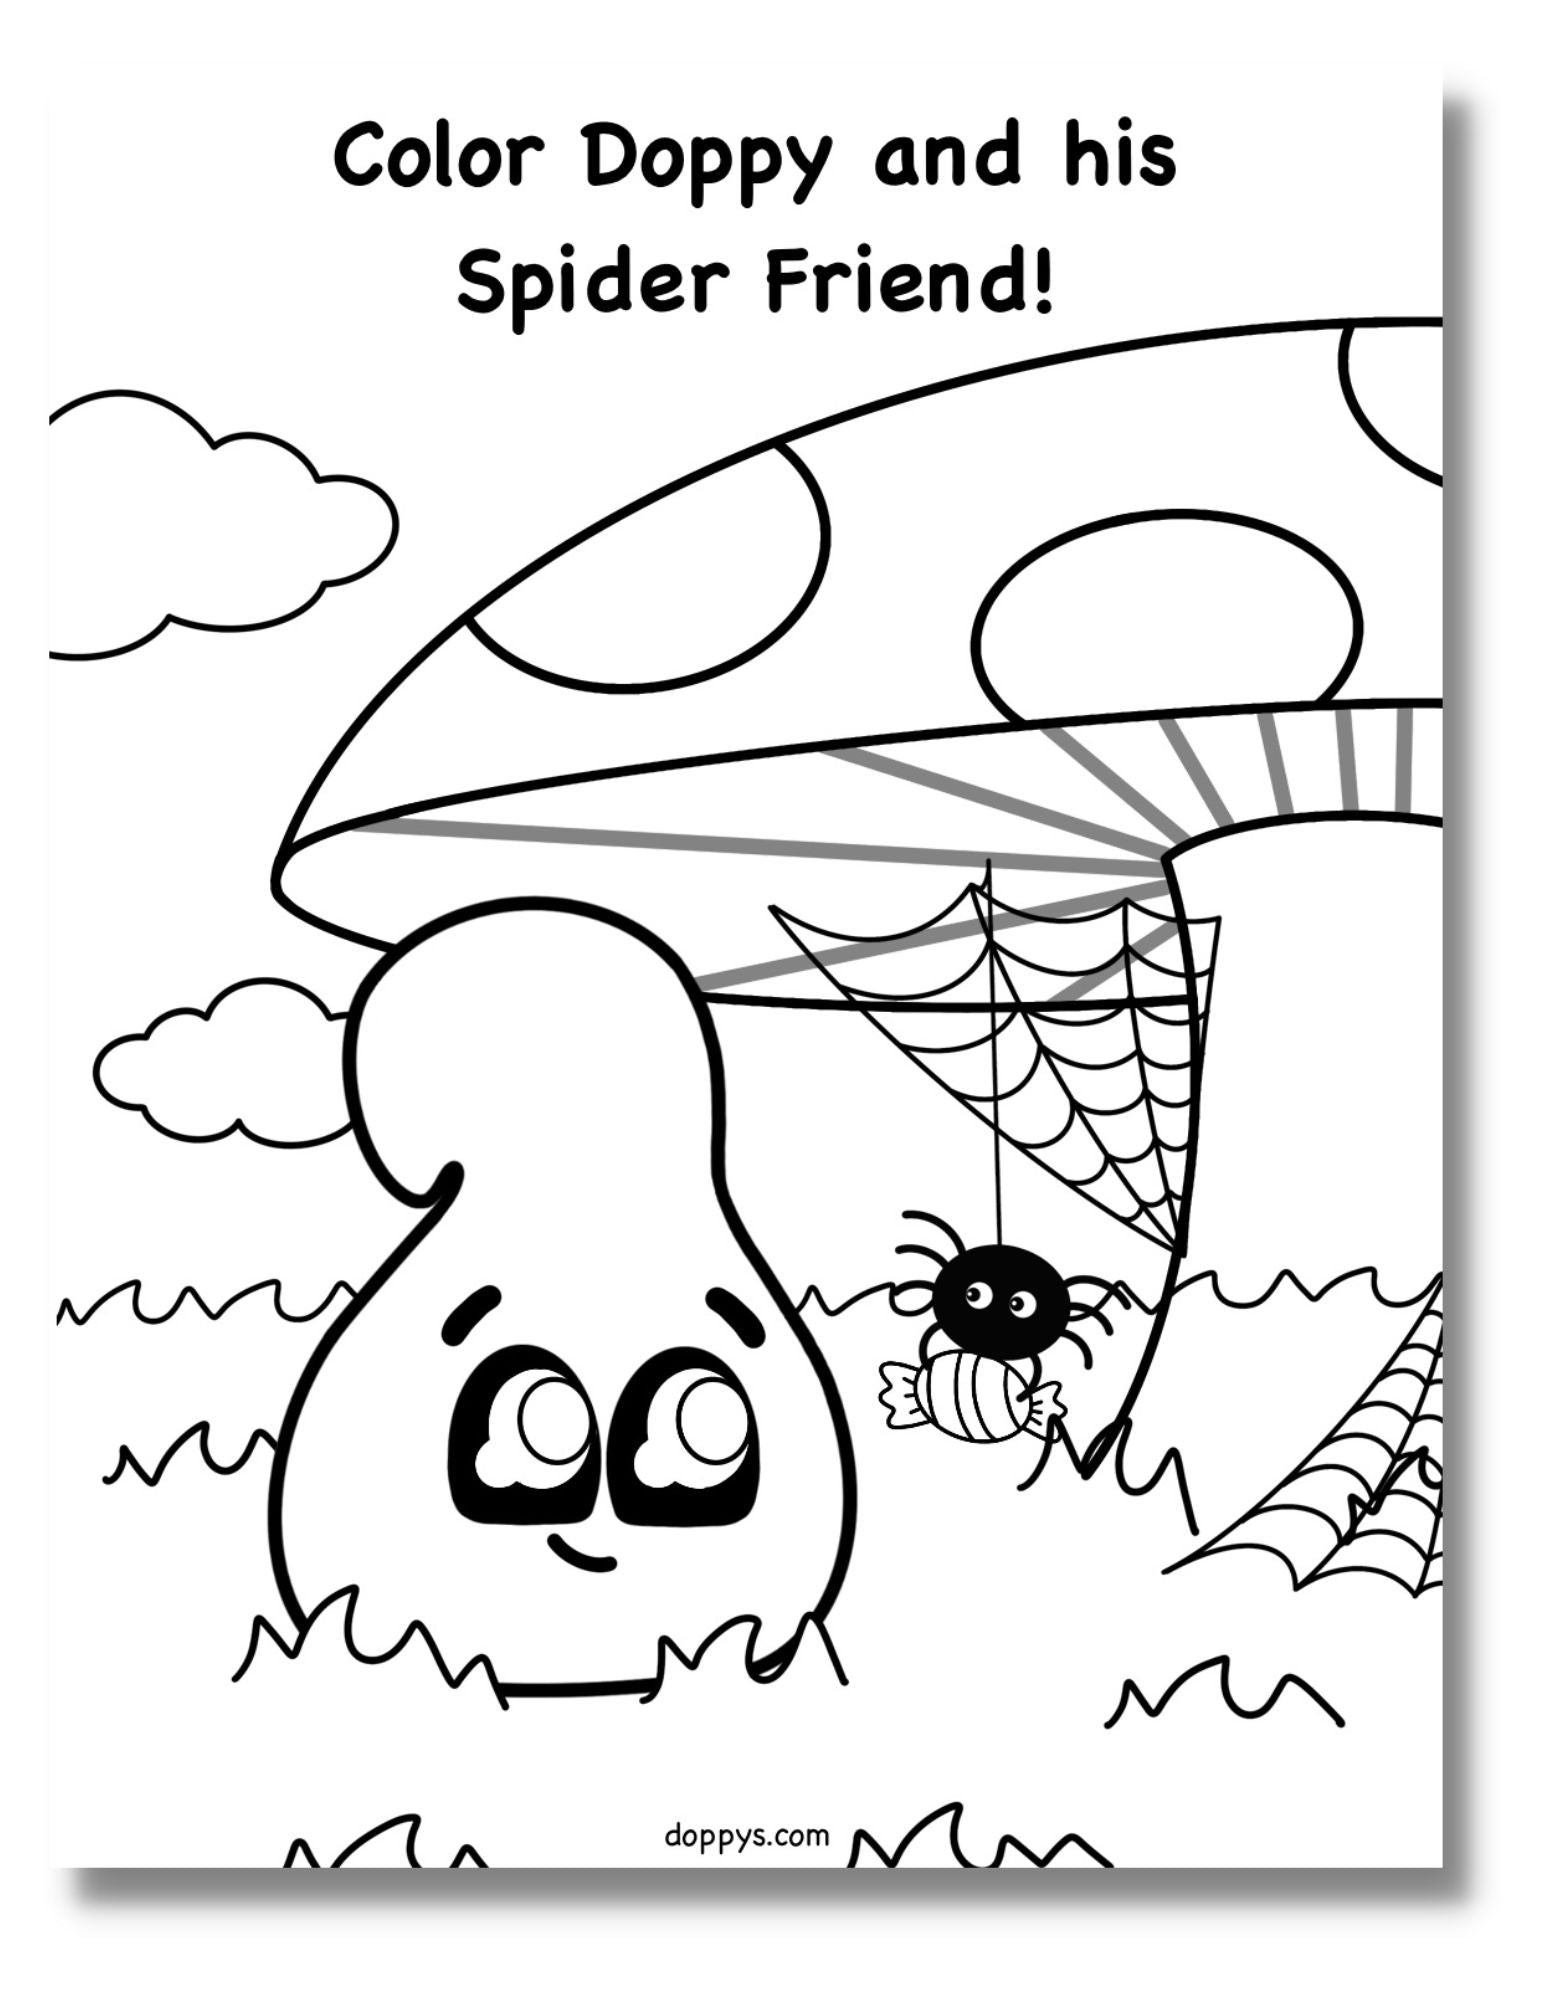 Halloween coloring page for kids doppy and spider â